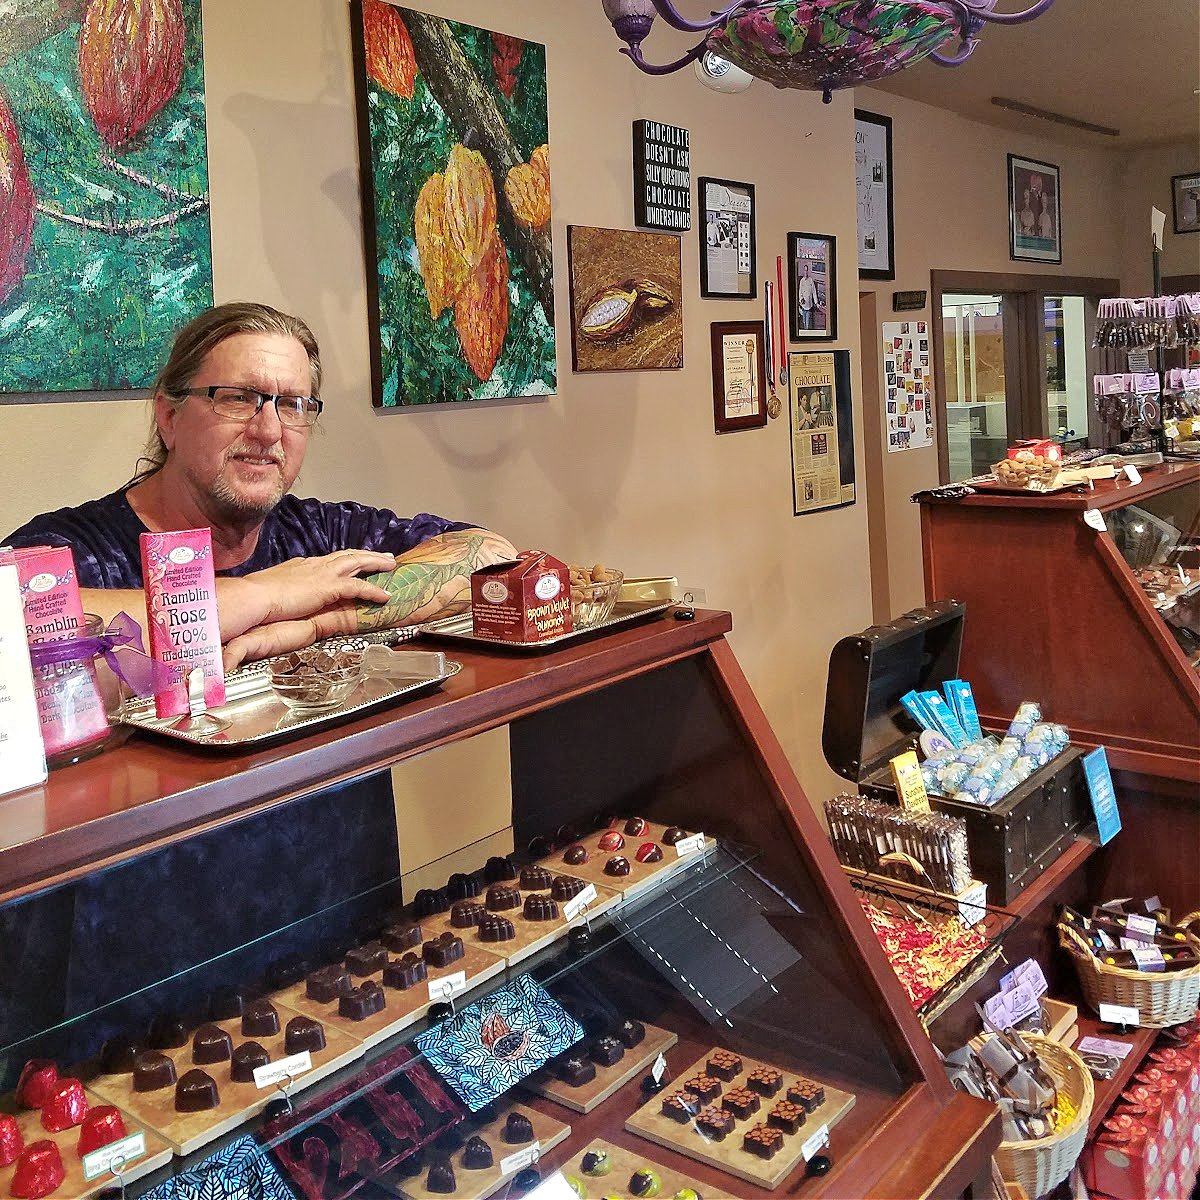 Interior of Lillie Belle Farms shop. Jeff standing behind a glass counter filled with various chocolates.